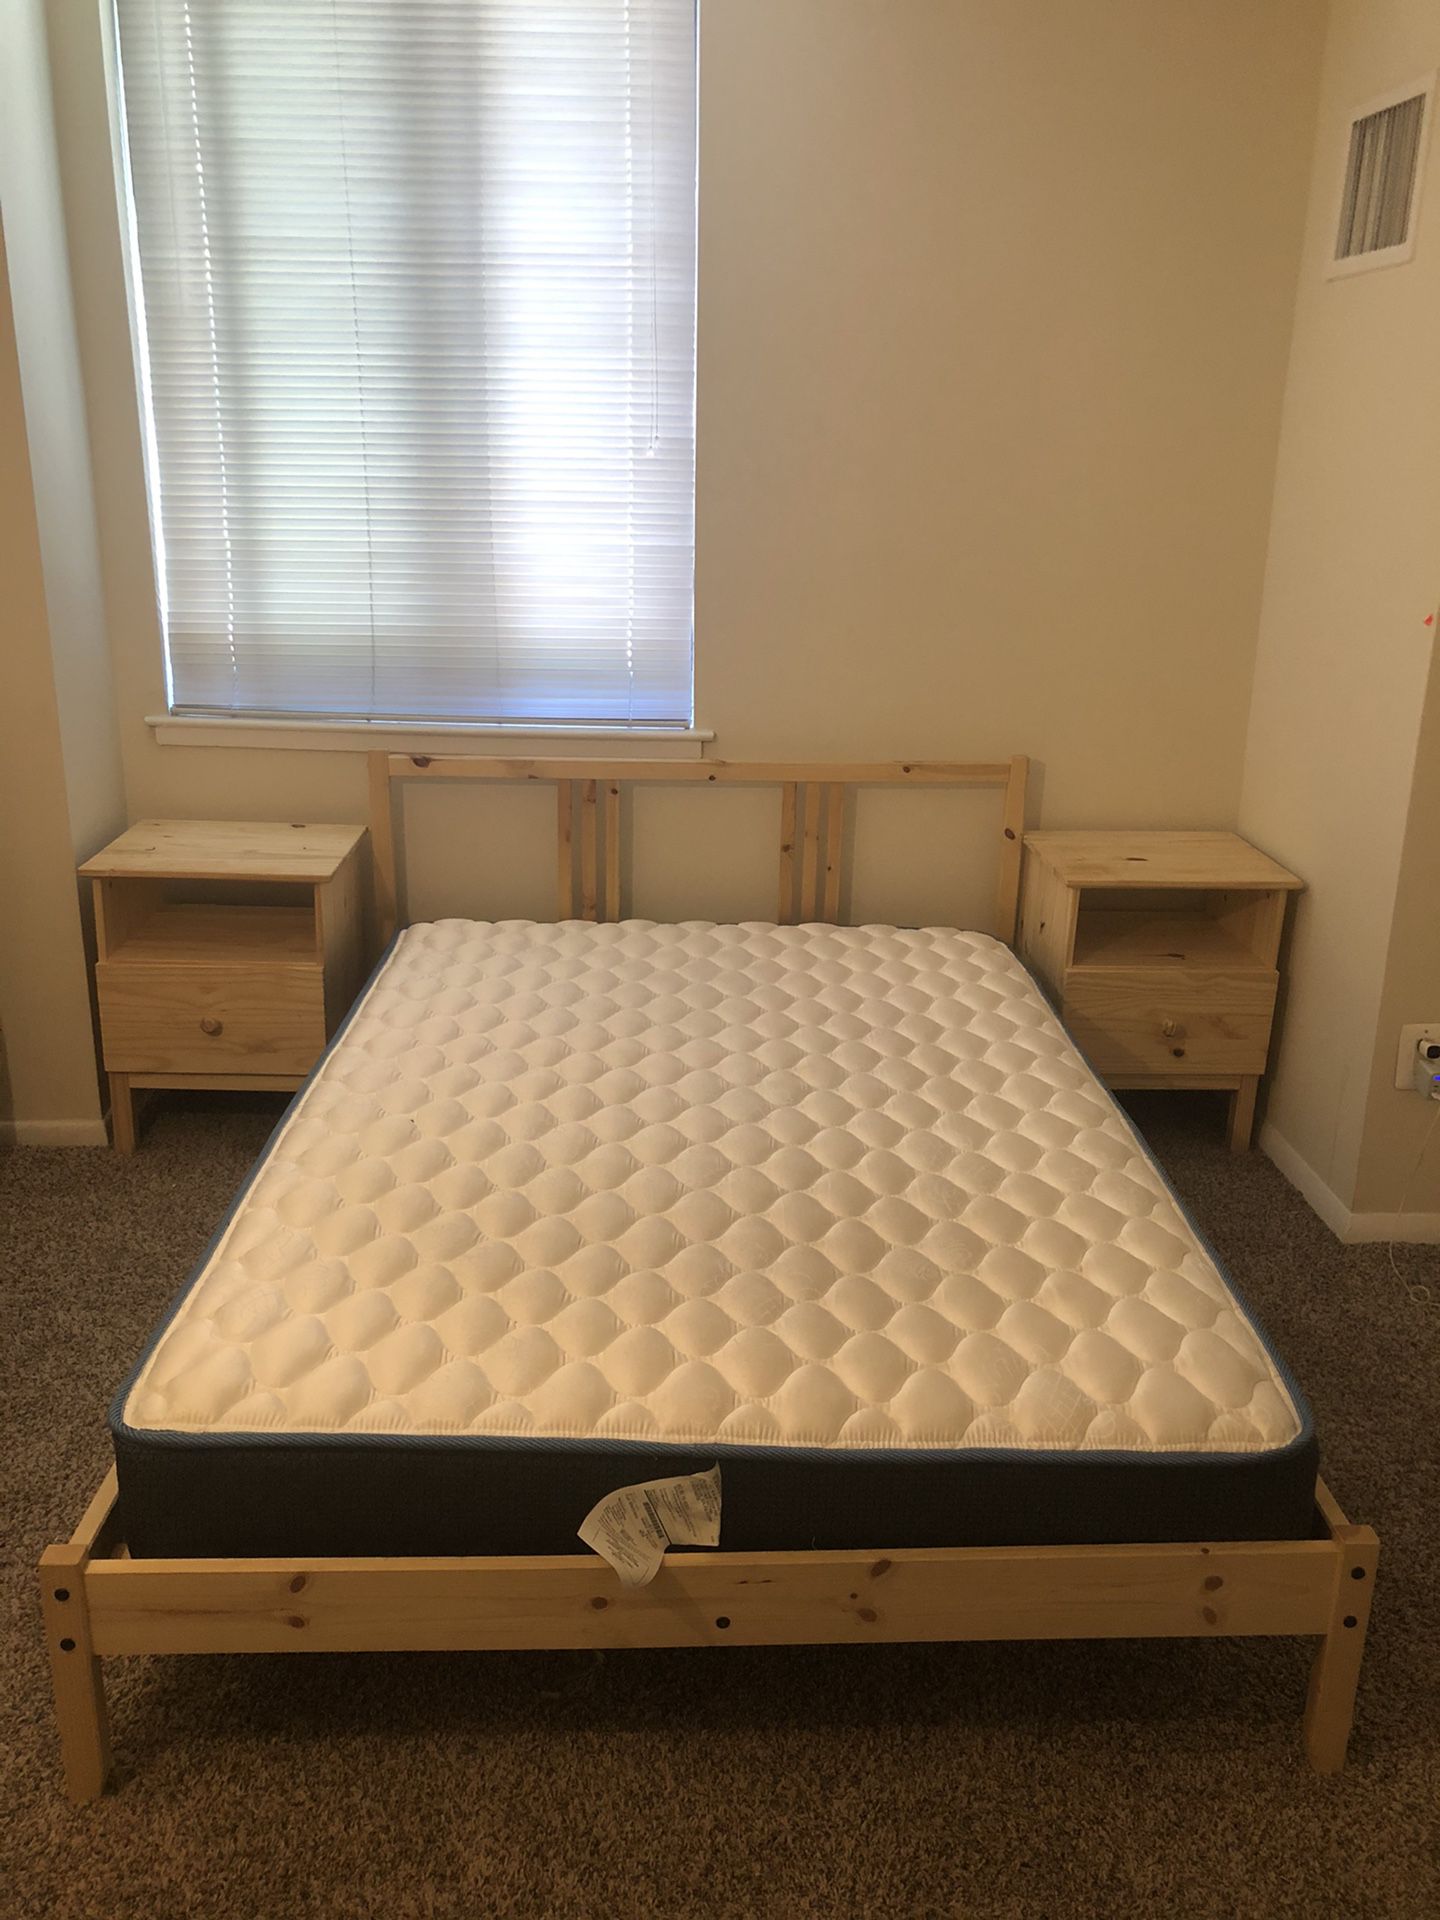 1 bed single and a half with mattress and 2 small bedside table, chest of drawers